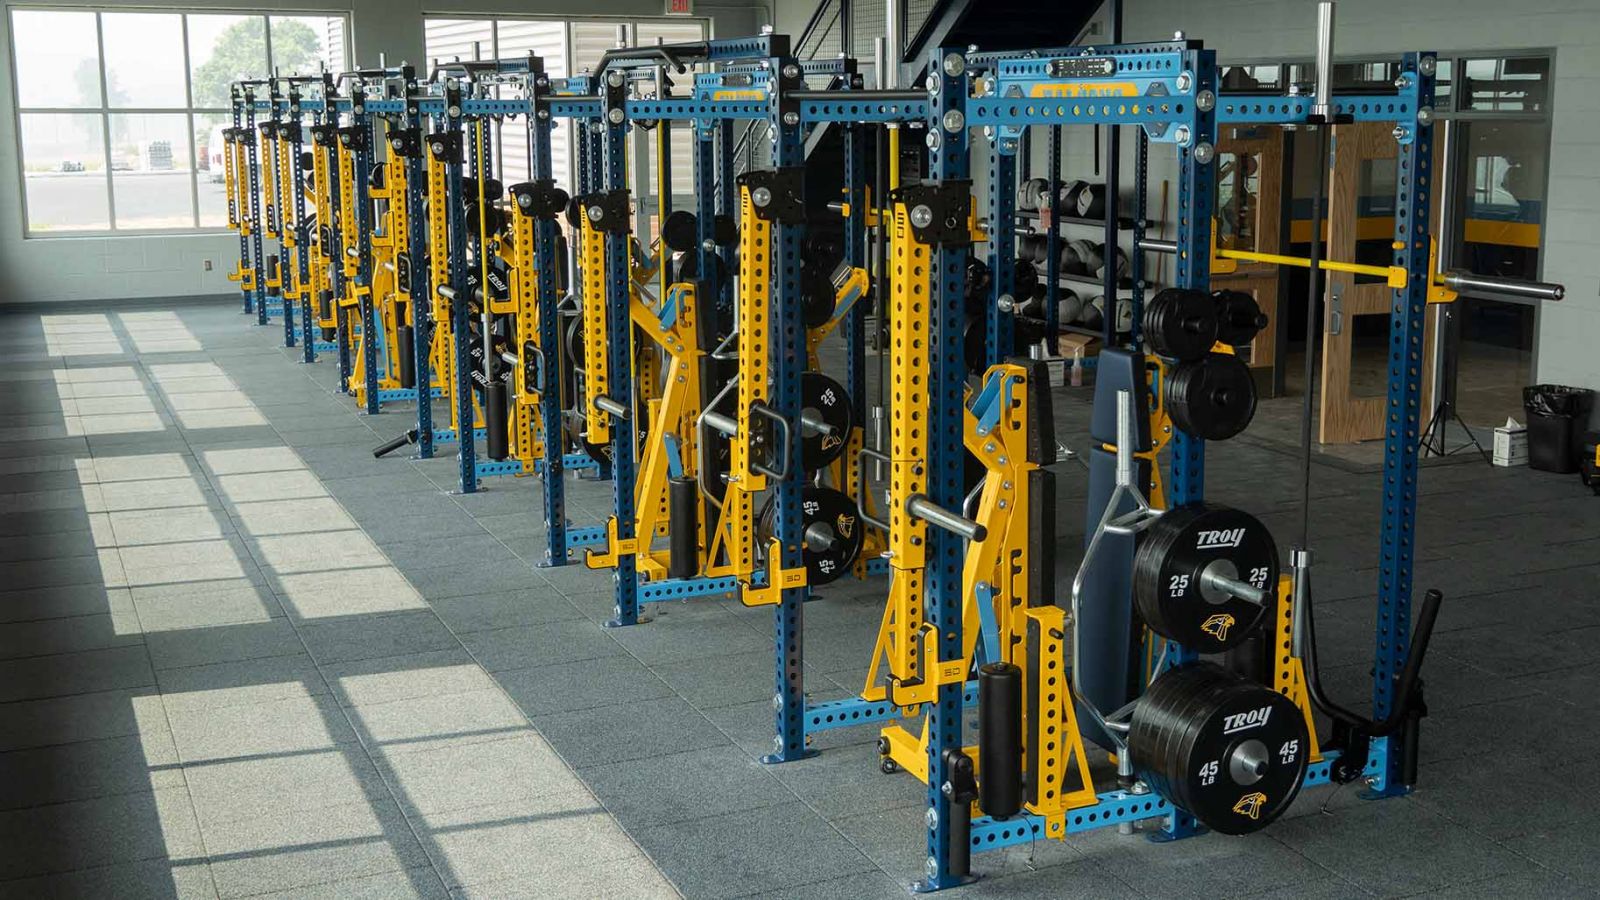 An image of a row of weight equipment machines.